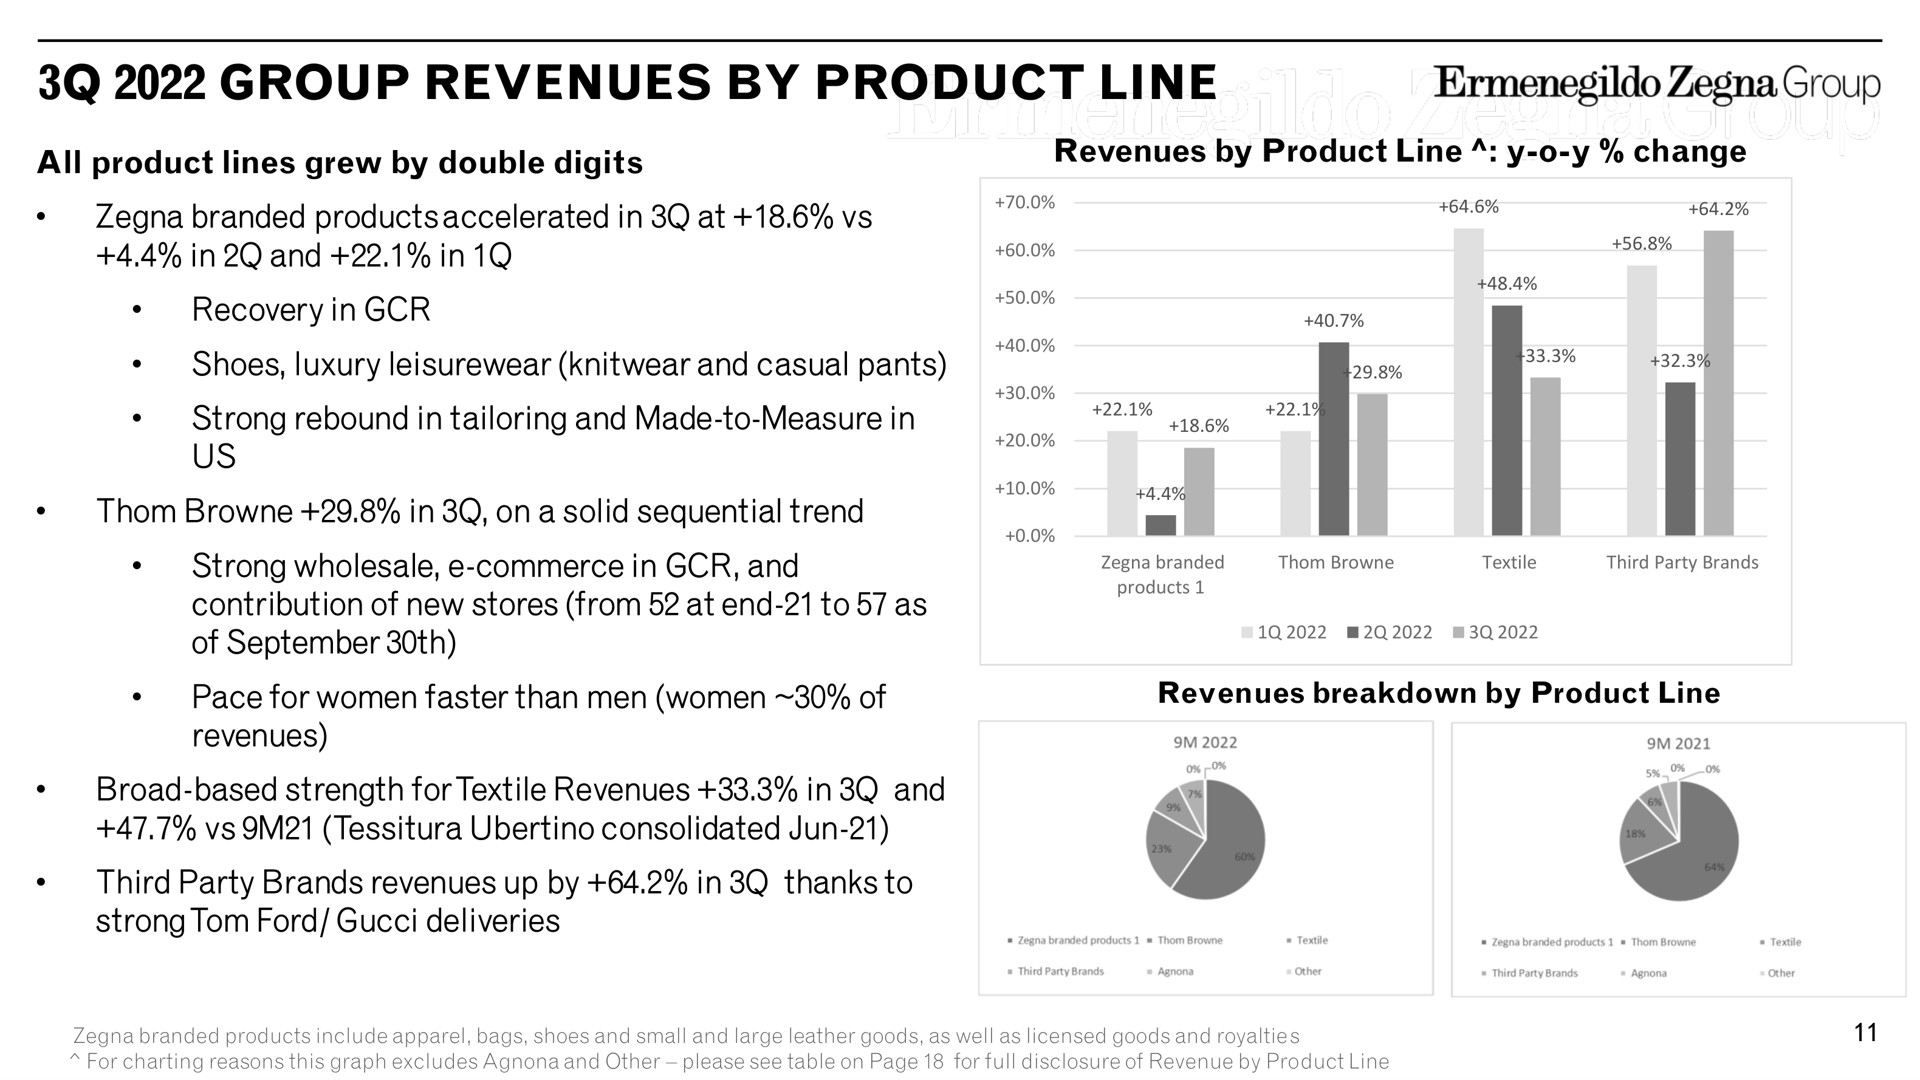 group revenues by product line in and in recovery in moos | Zegna